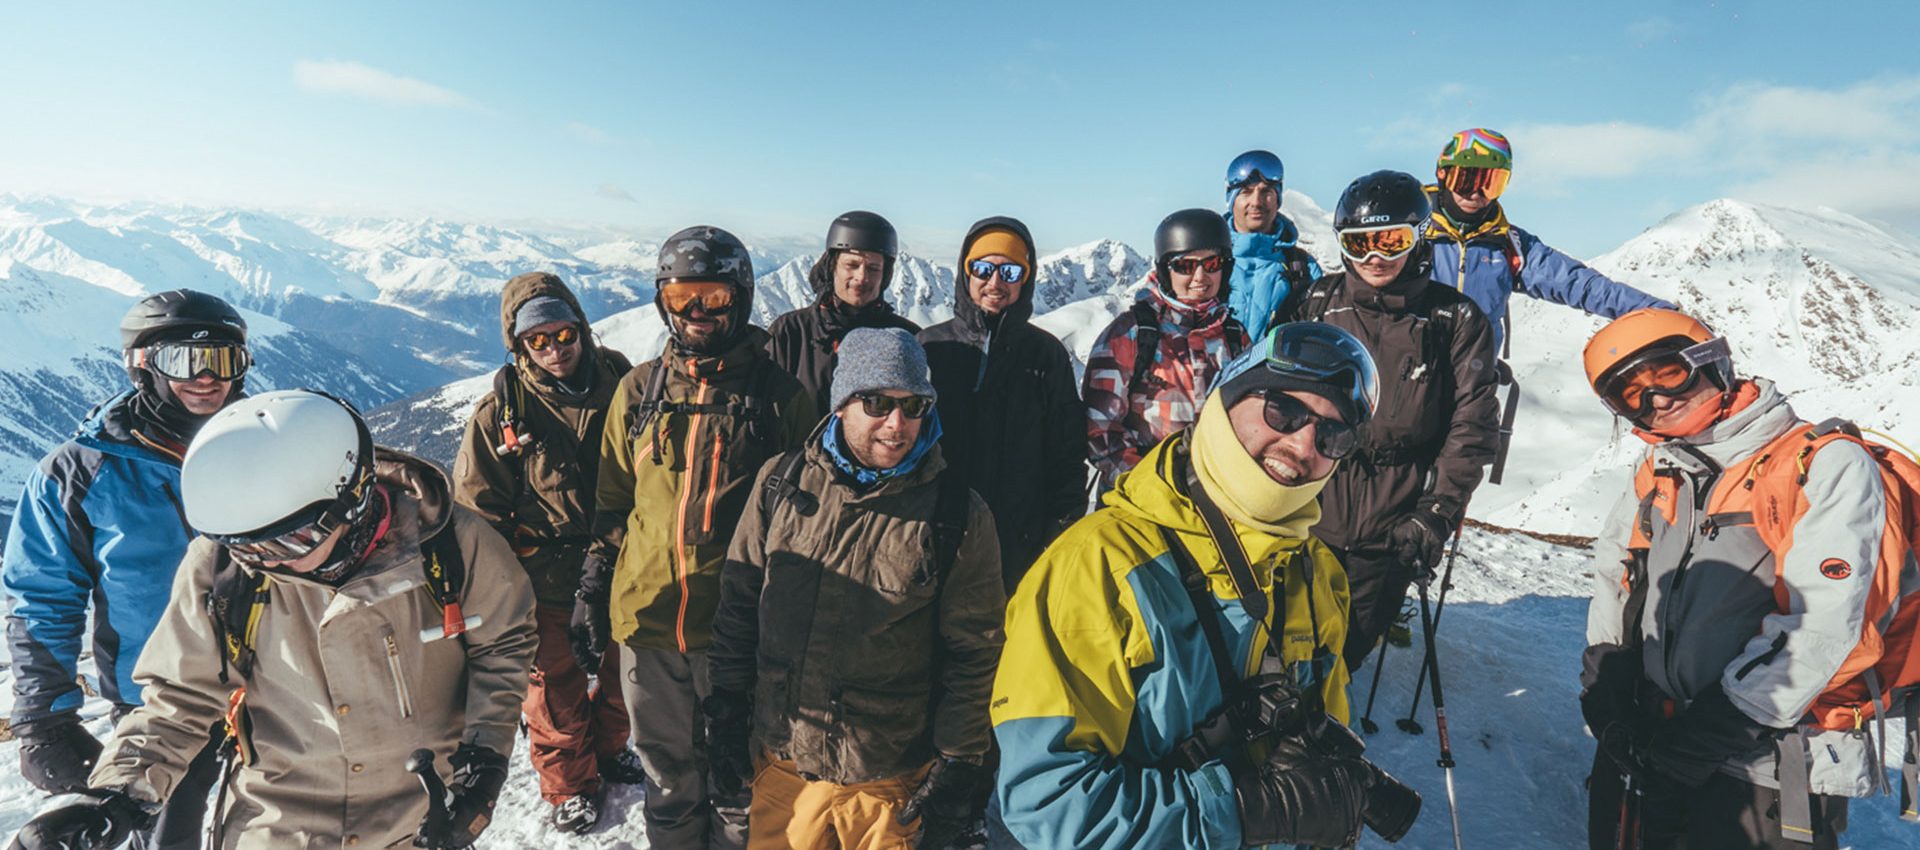 Freeriding always brings a great crew together.